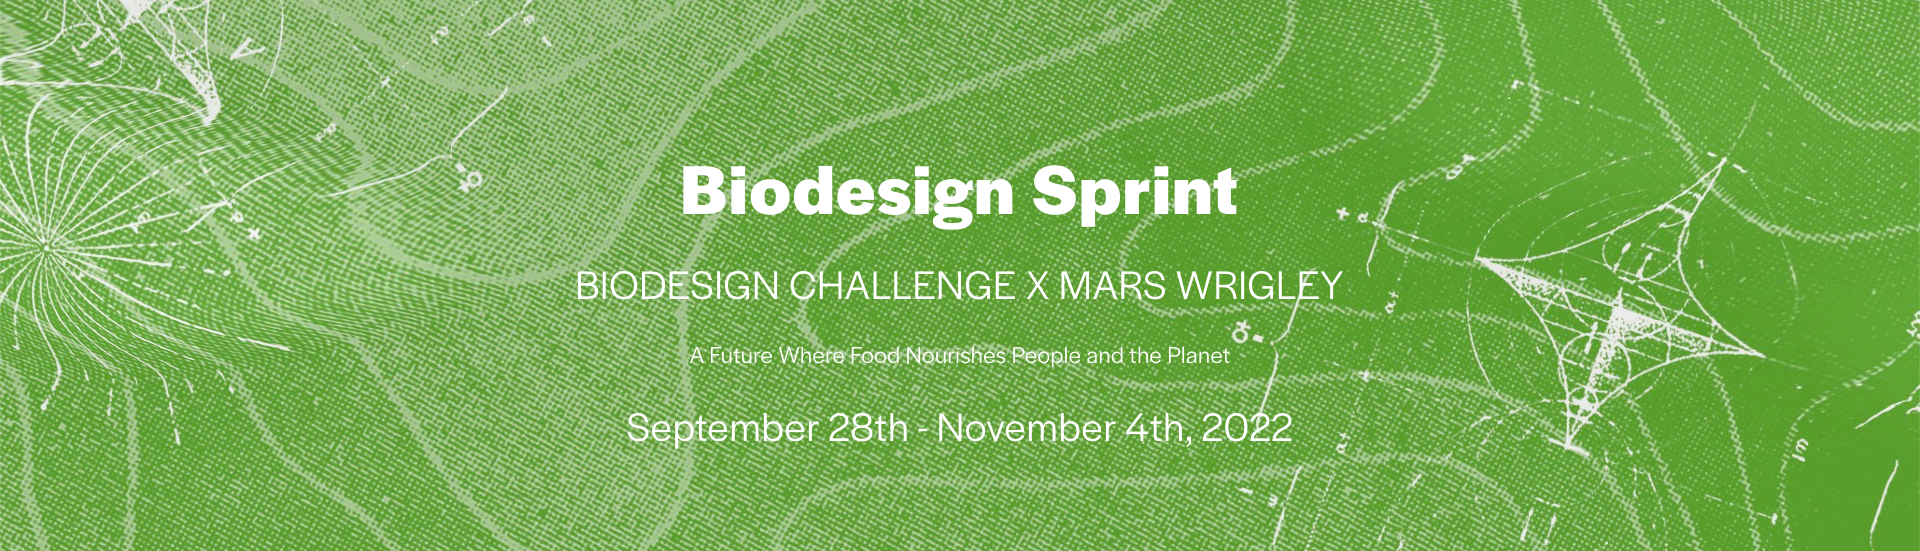 Green background with white scientific sketches. Text reads "Biodesign Sprint, Biodesign Challenge x Mars Wrigley, A future where food nourishes people and the planet, September 28th - November 4th 2022